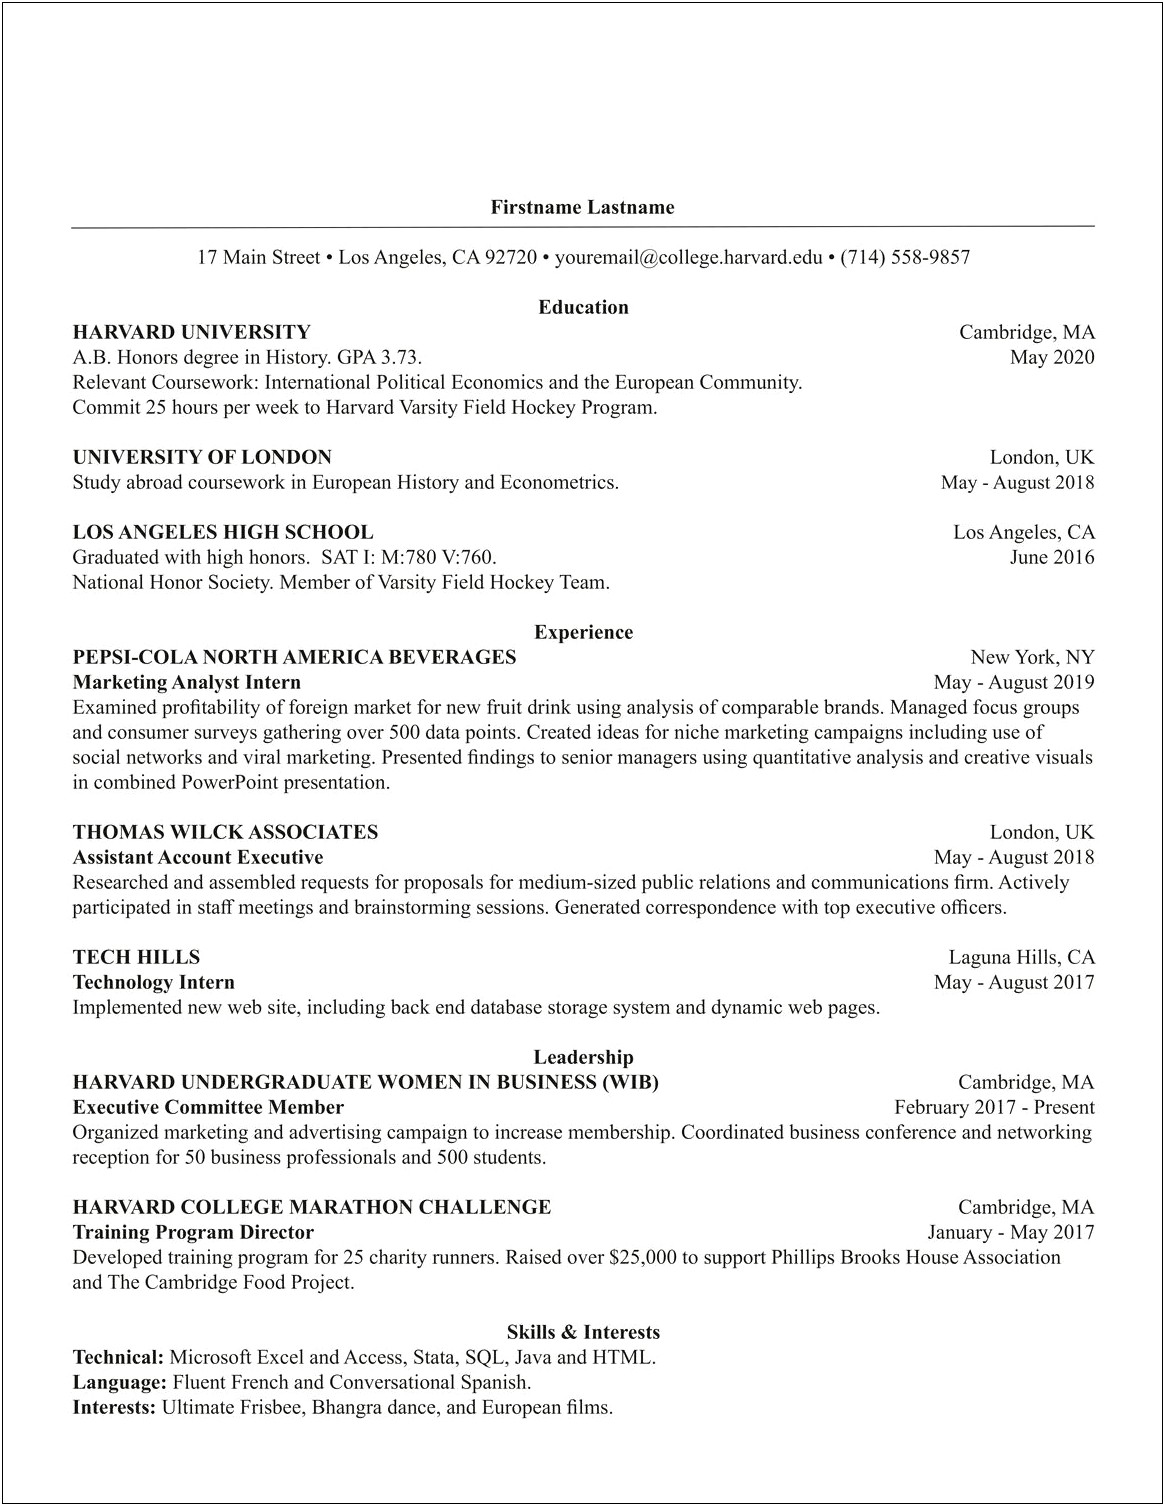 Best Resume Format For Political Campaign